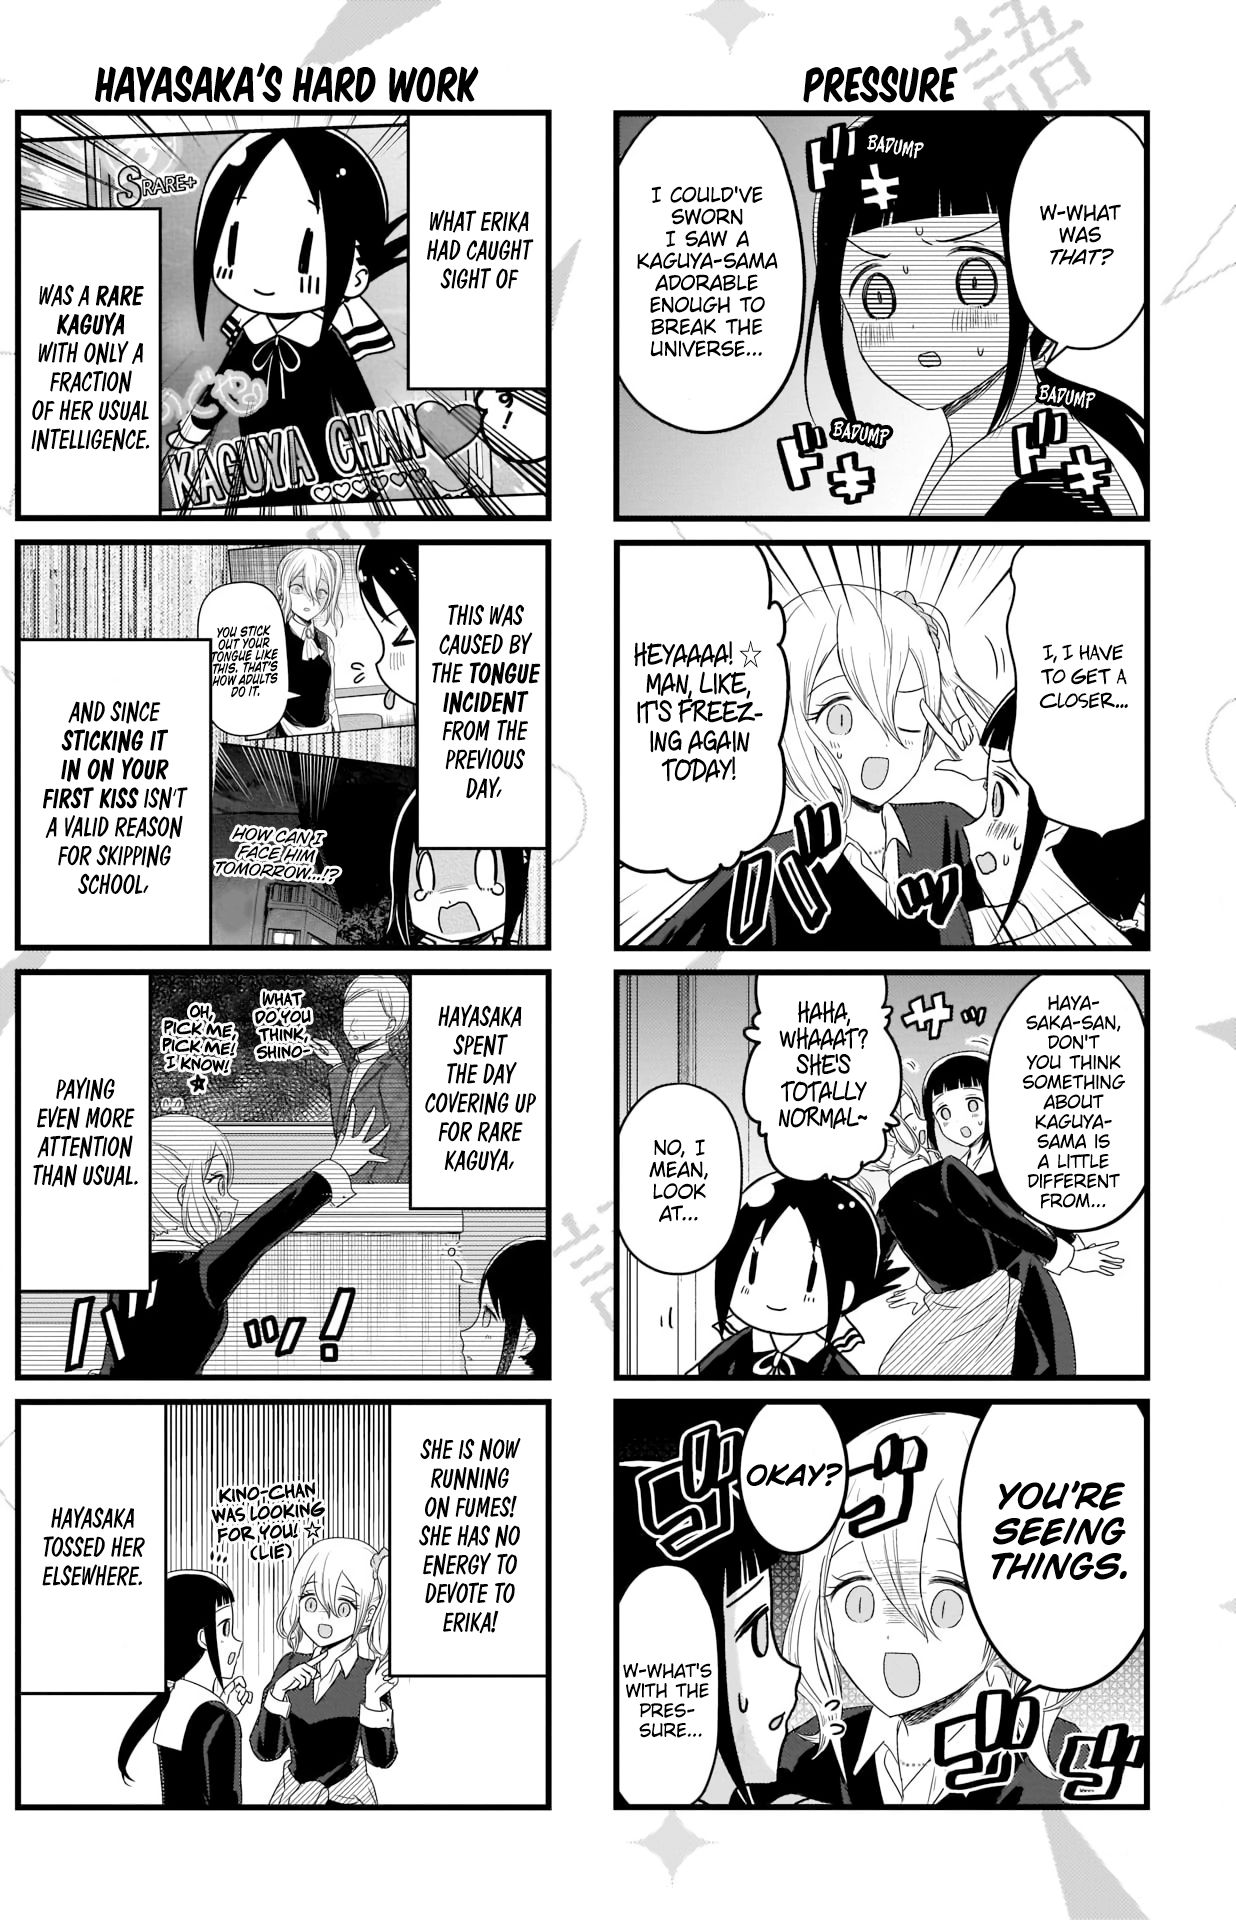 We Want to Talk About Kaguya - chapter 116 - #3